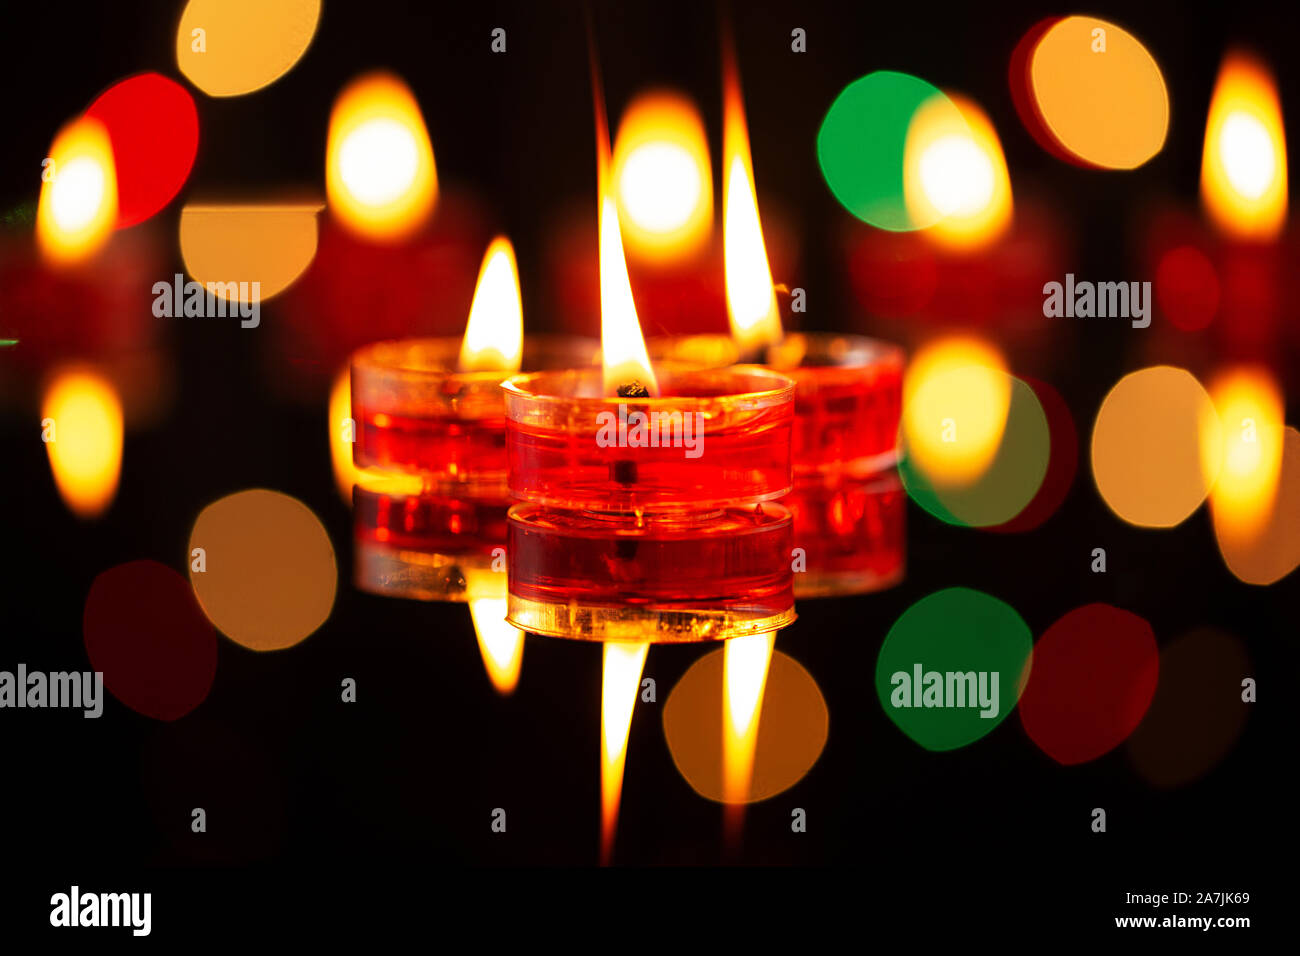 Traditional Diwali lamps and candles lit on the occasion of Diwali festival Stock Photo